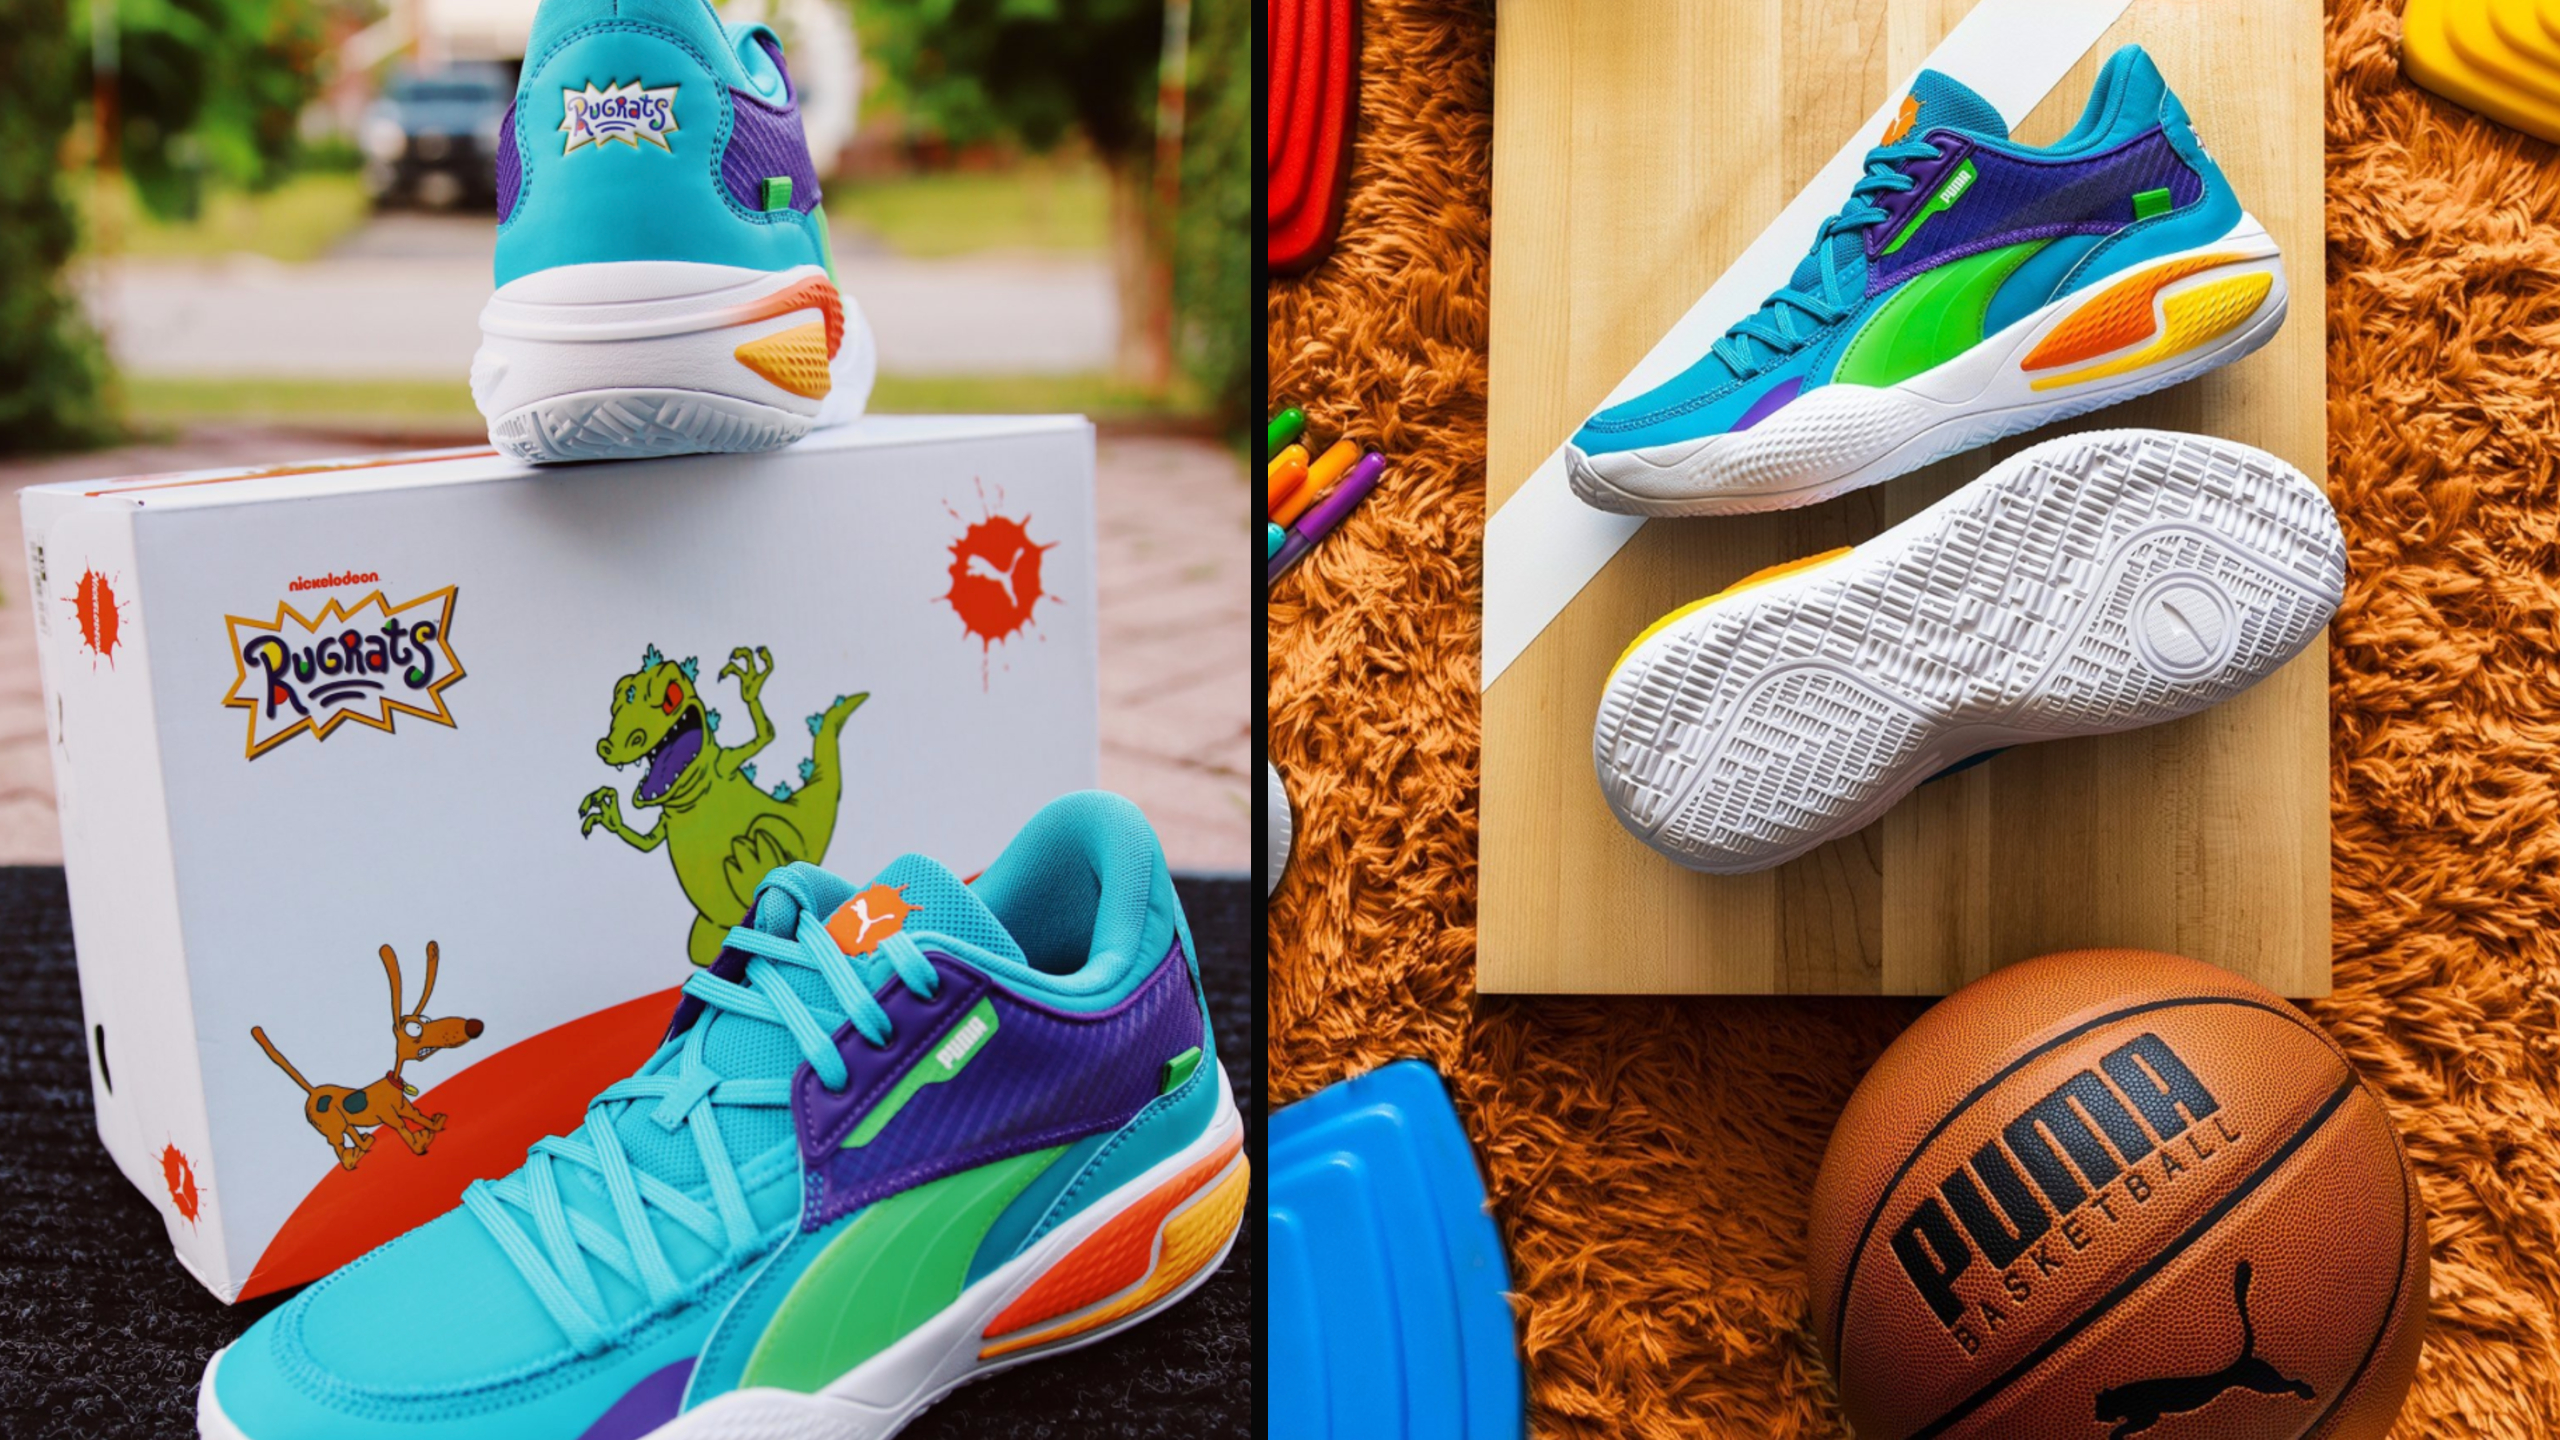 Rugrats And Puma Collab Is Pure, Please Take Your Shoes Off Rugrats